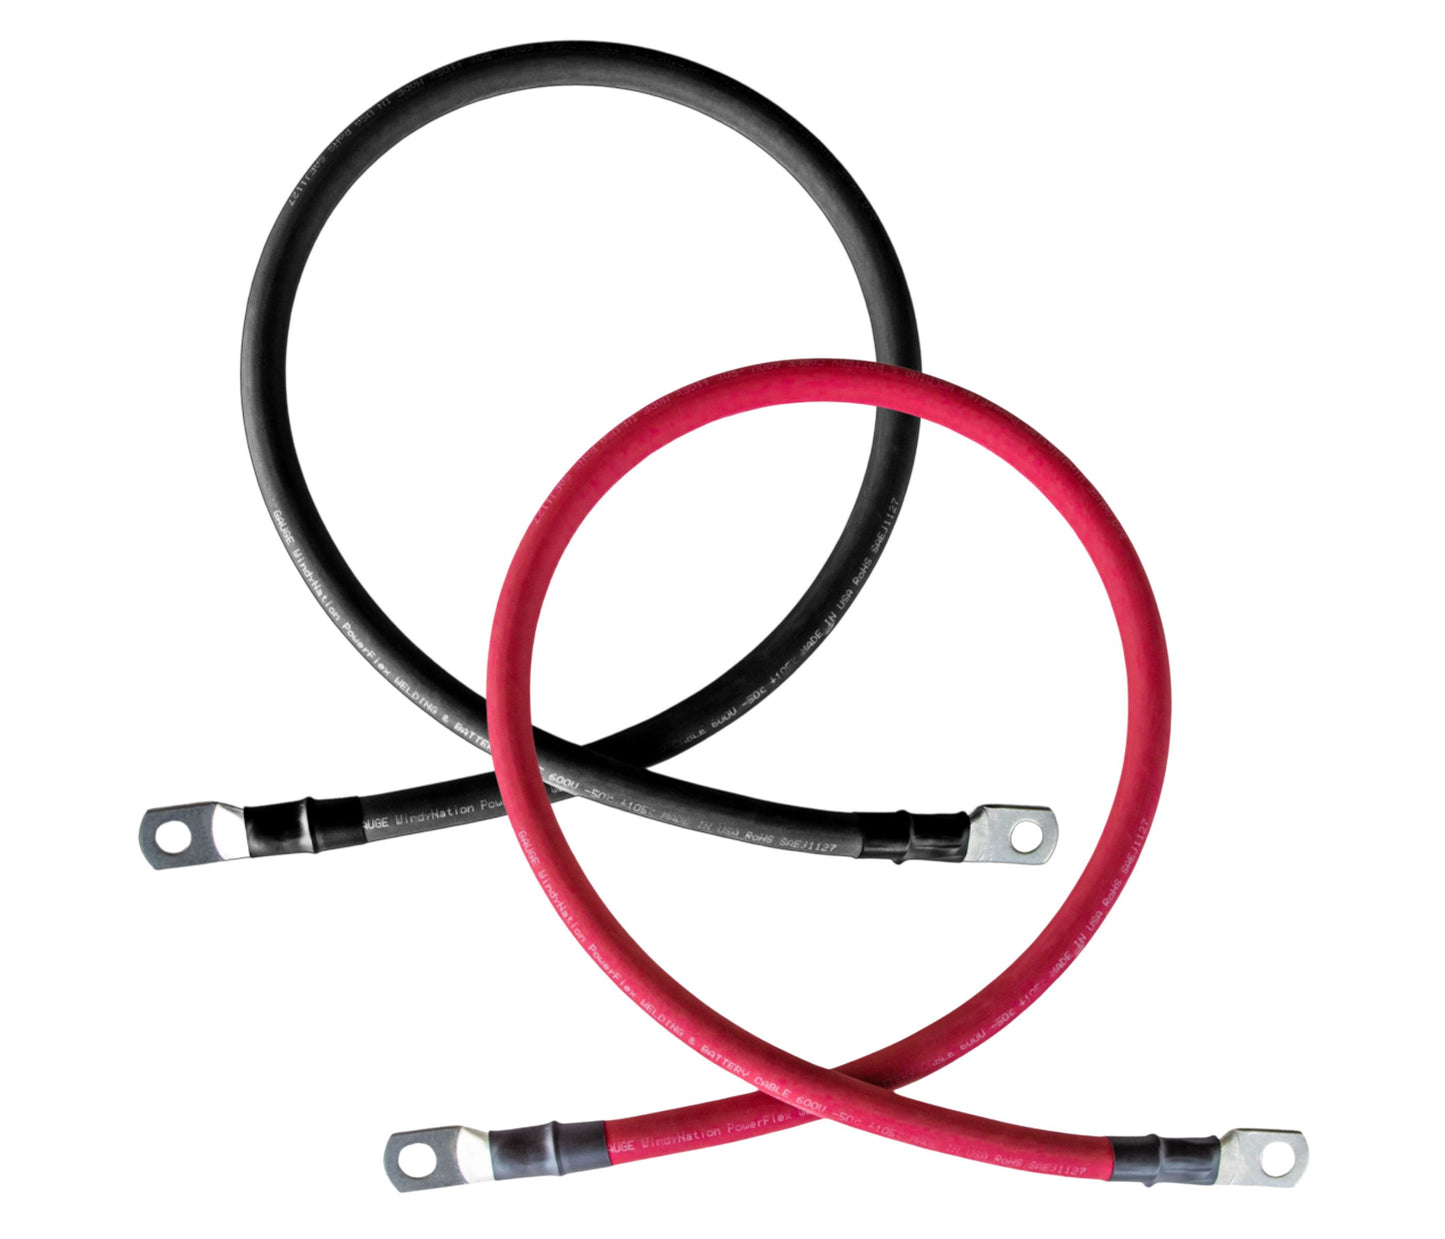 4/0 Gauge (AWG) Black and Red Pure Copper Battery Cable Wire with Lug Connector Ring Terminals